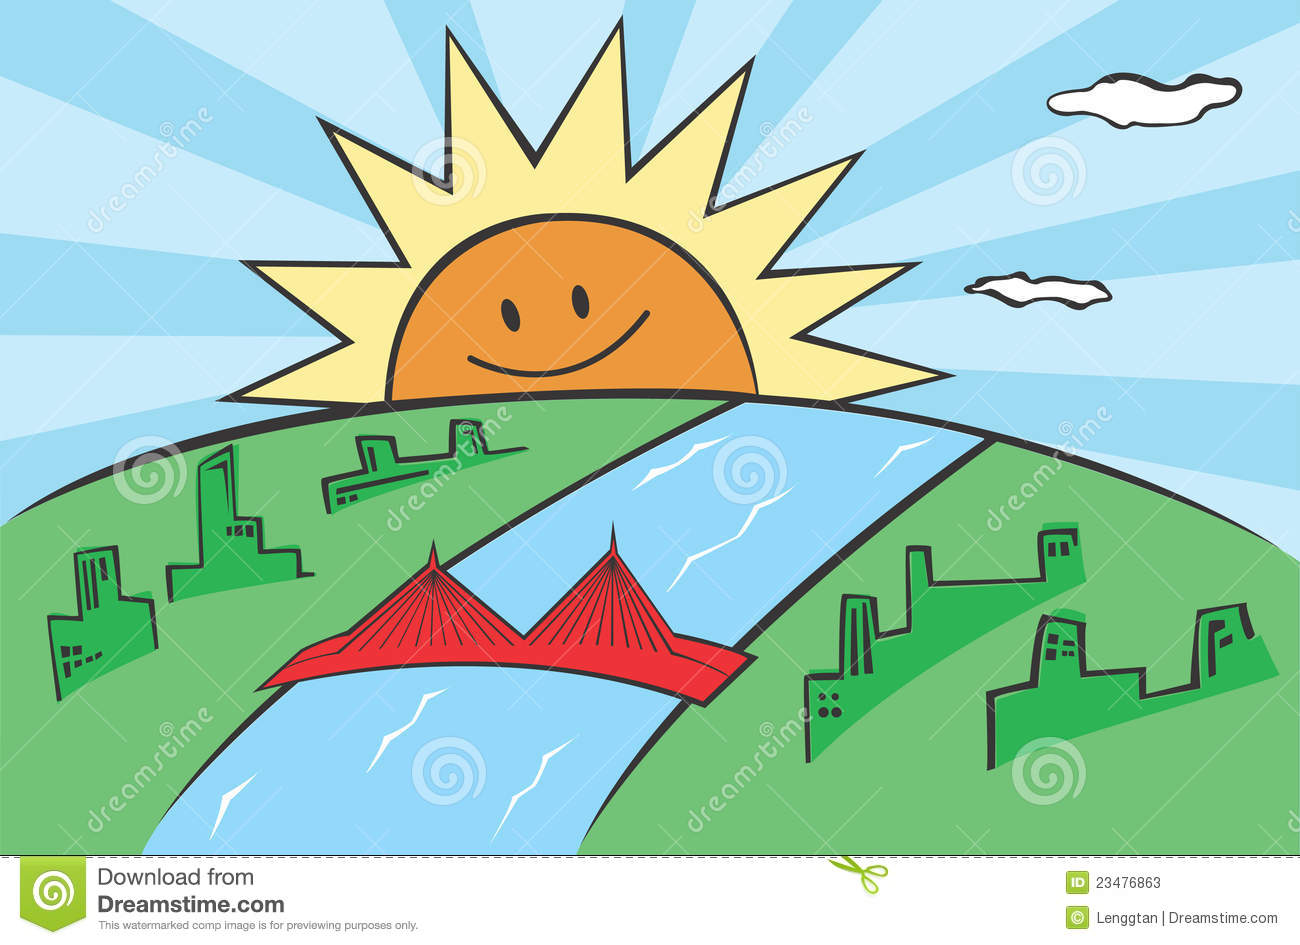 Morning clipart, Morning Transparent FREE for download on.